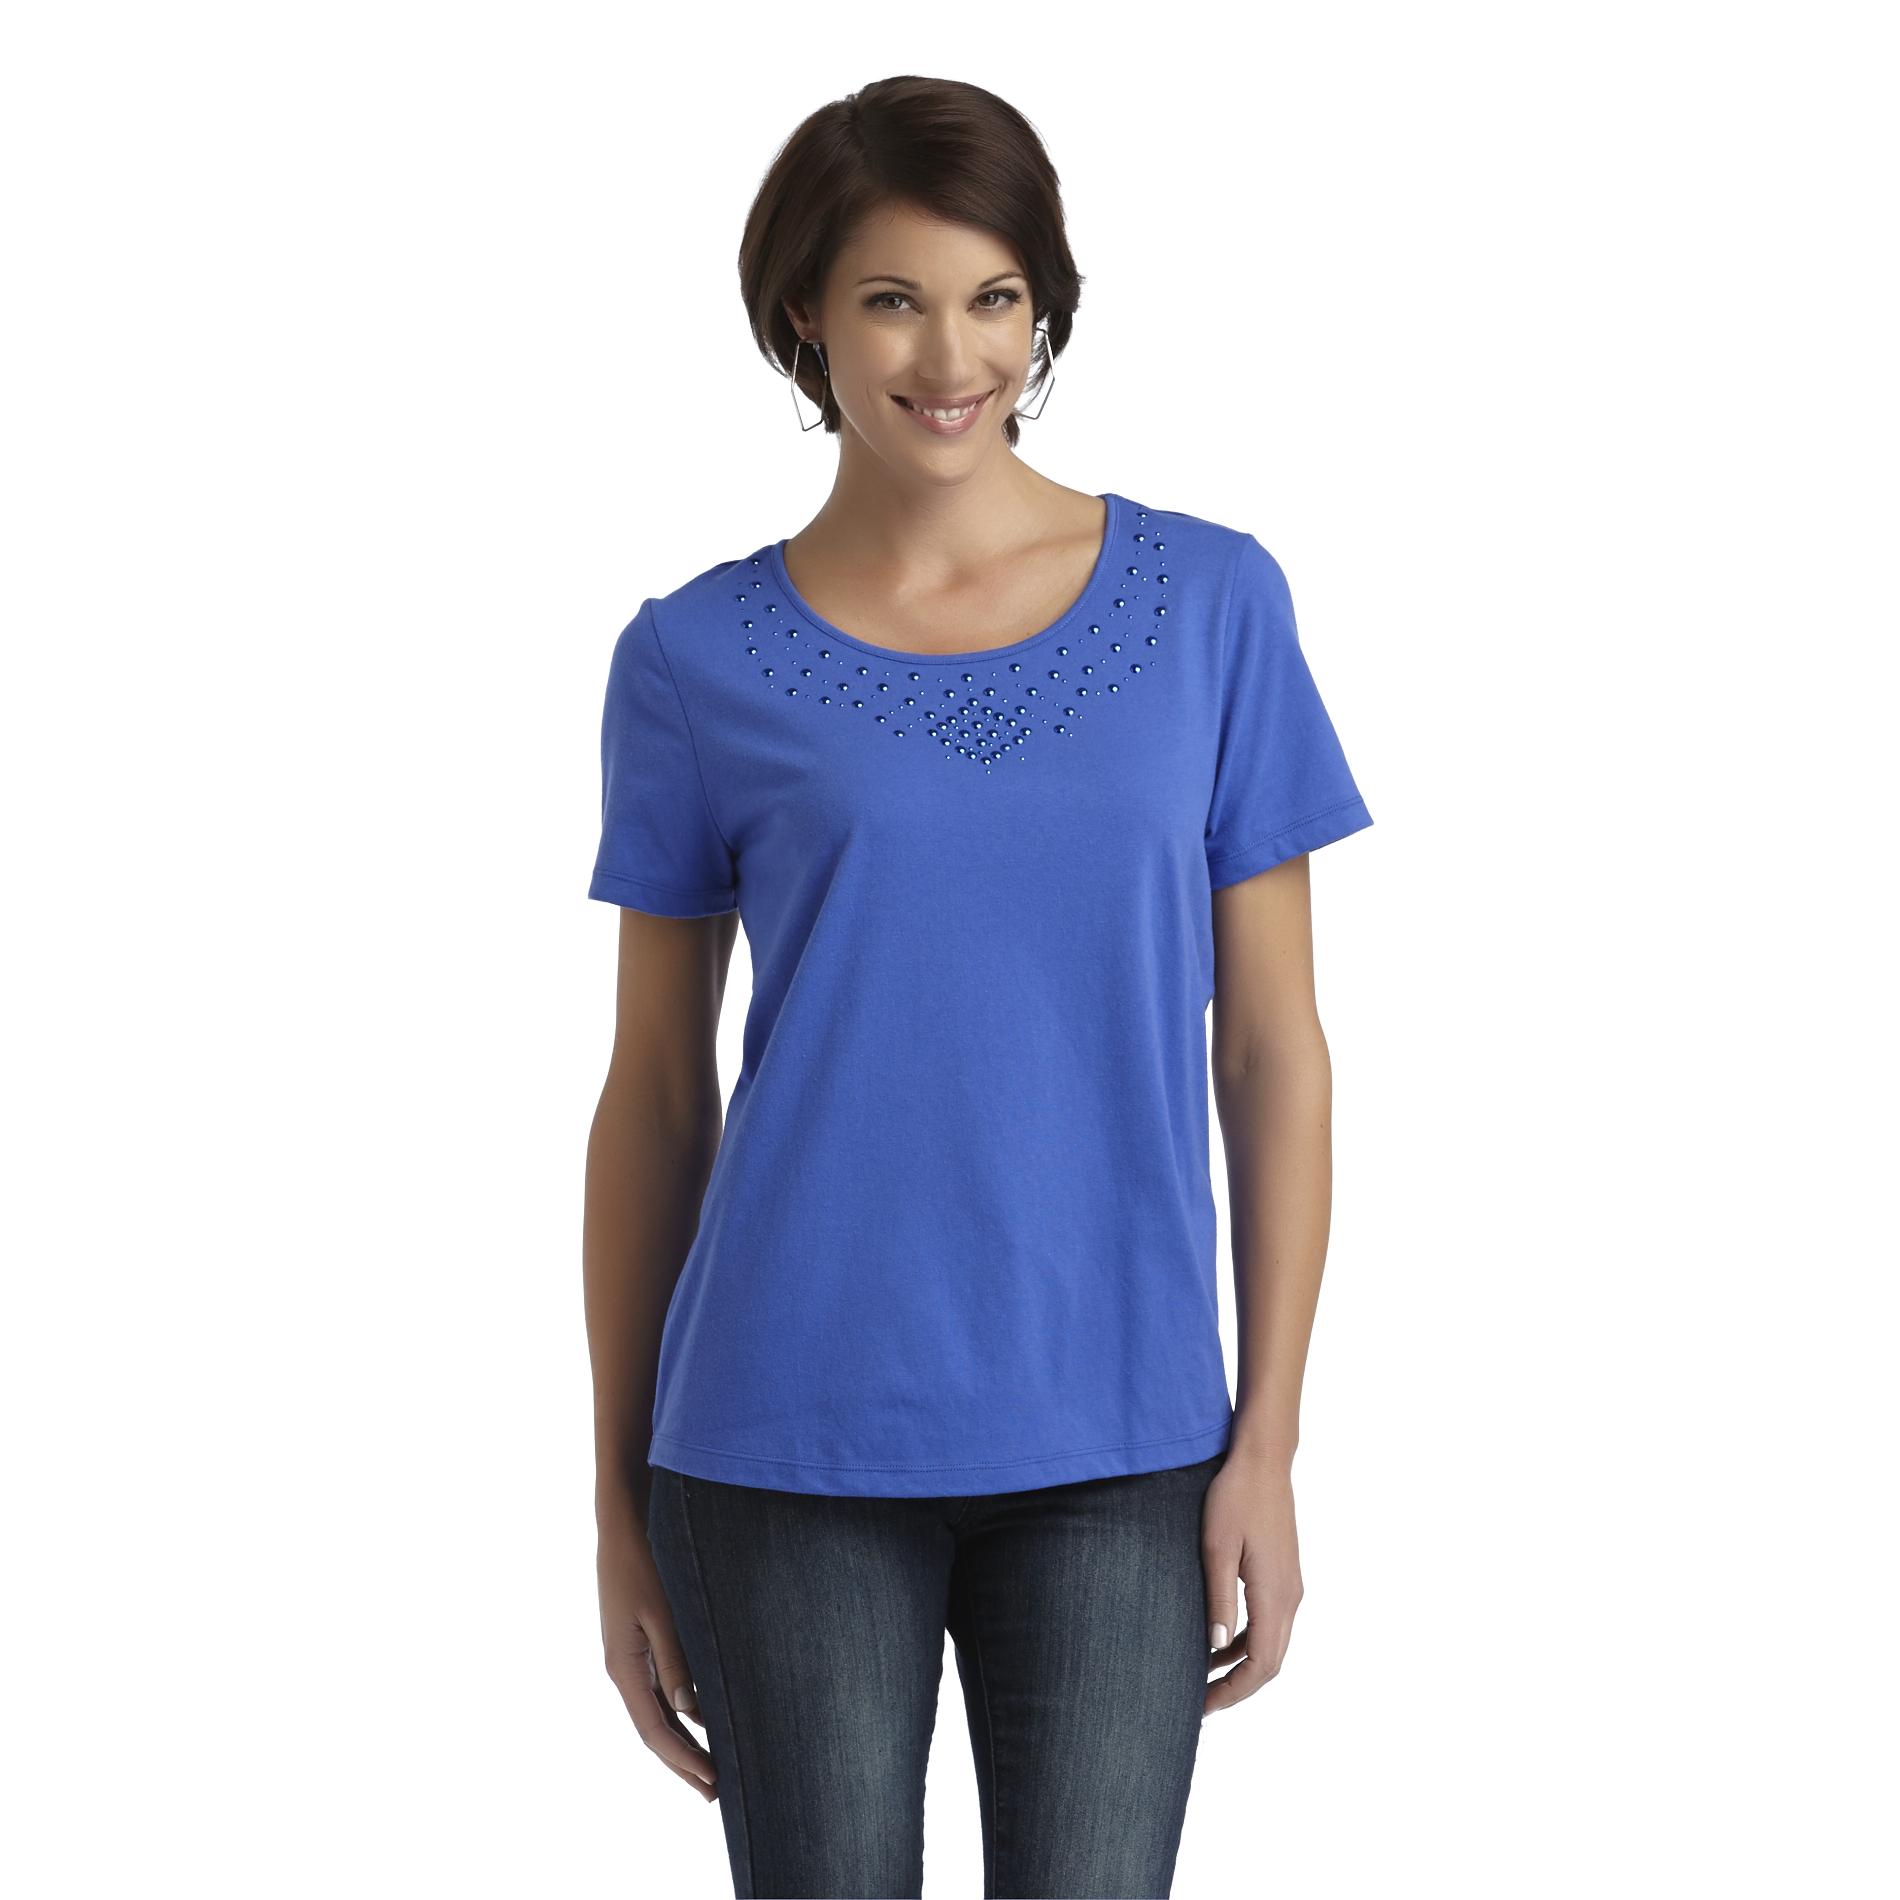 Jaclyn Smith Women's Embellished T-Shirt - Studded